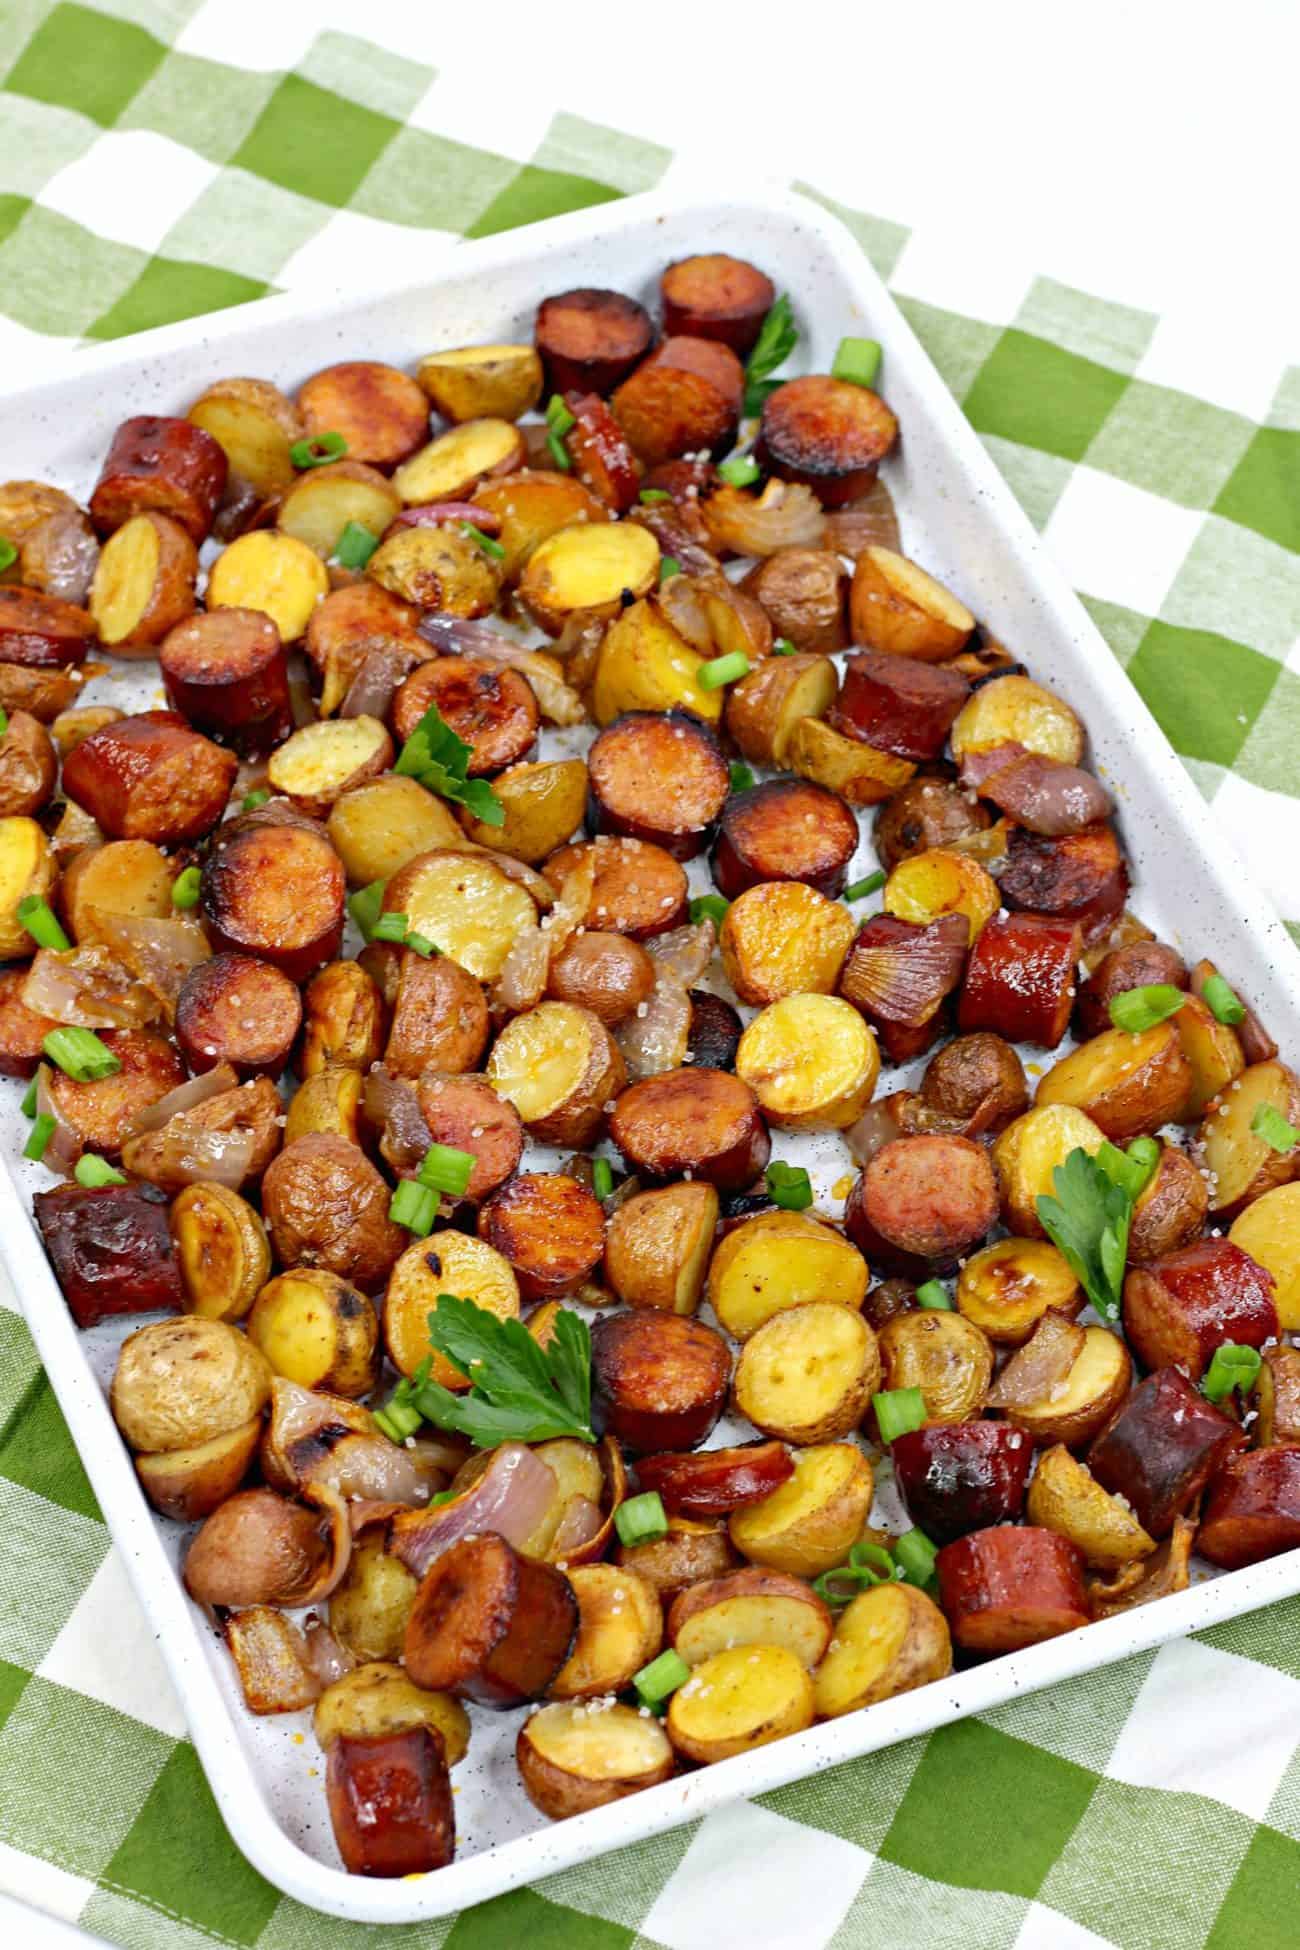 Oven Roasted Sausage and Potatoes